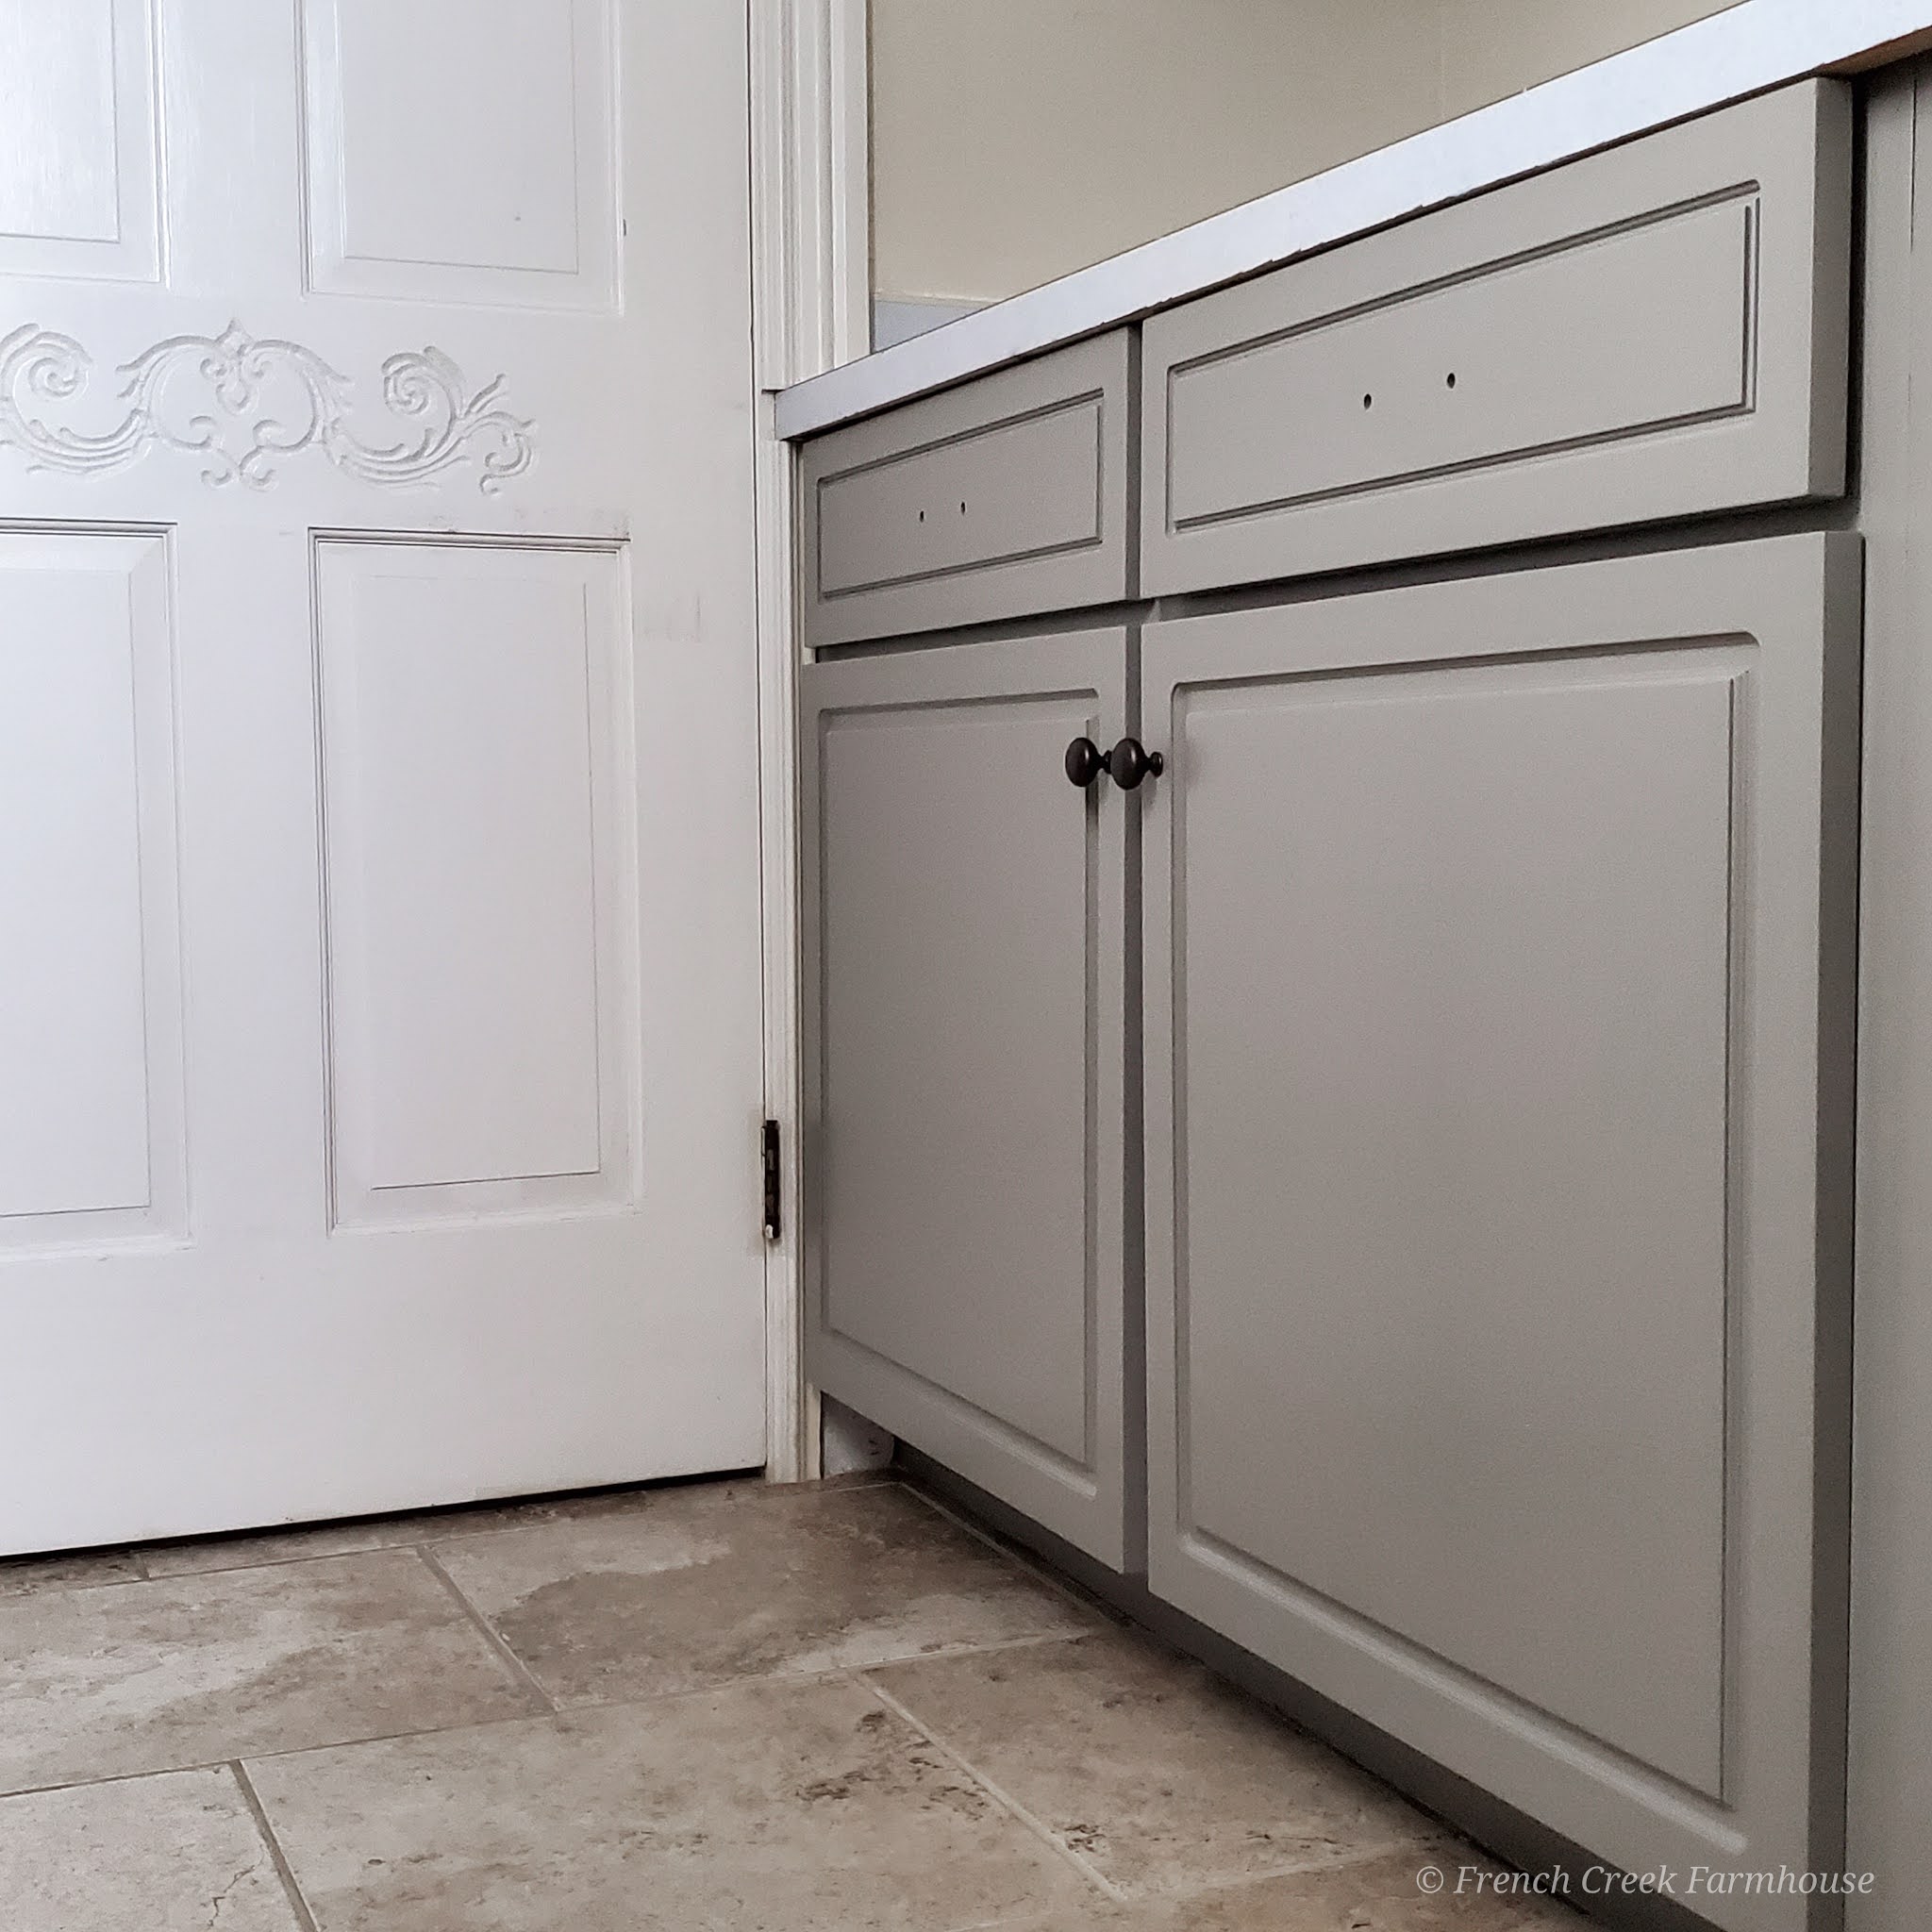 Painting our laundry room cabinets